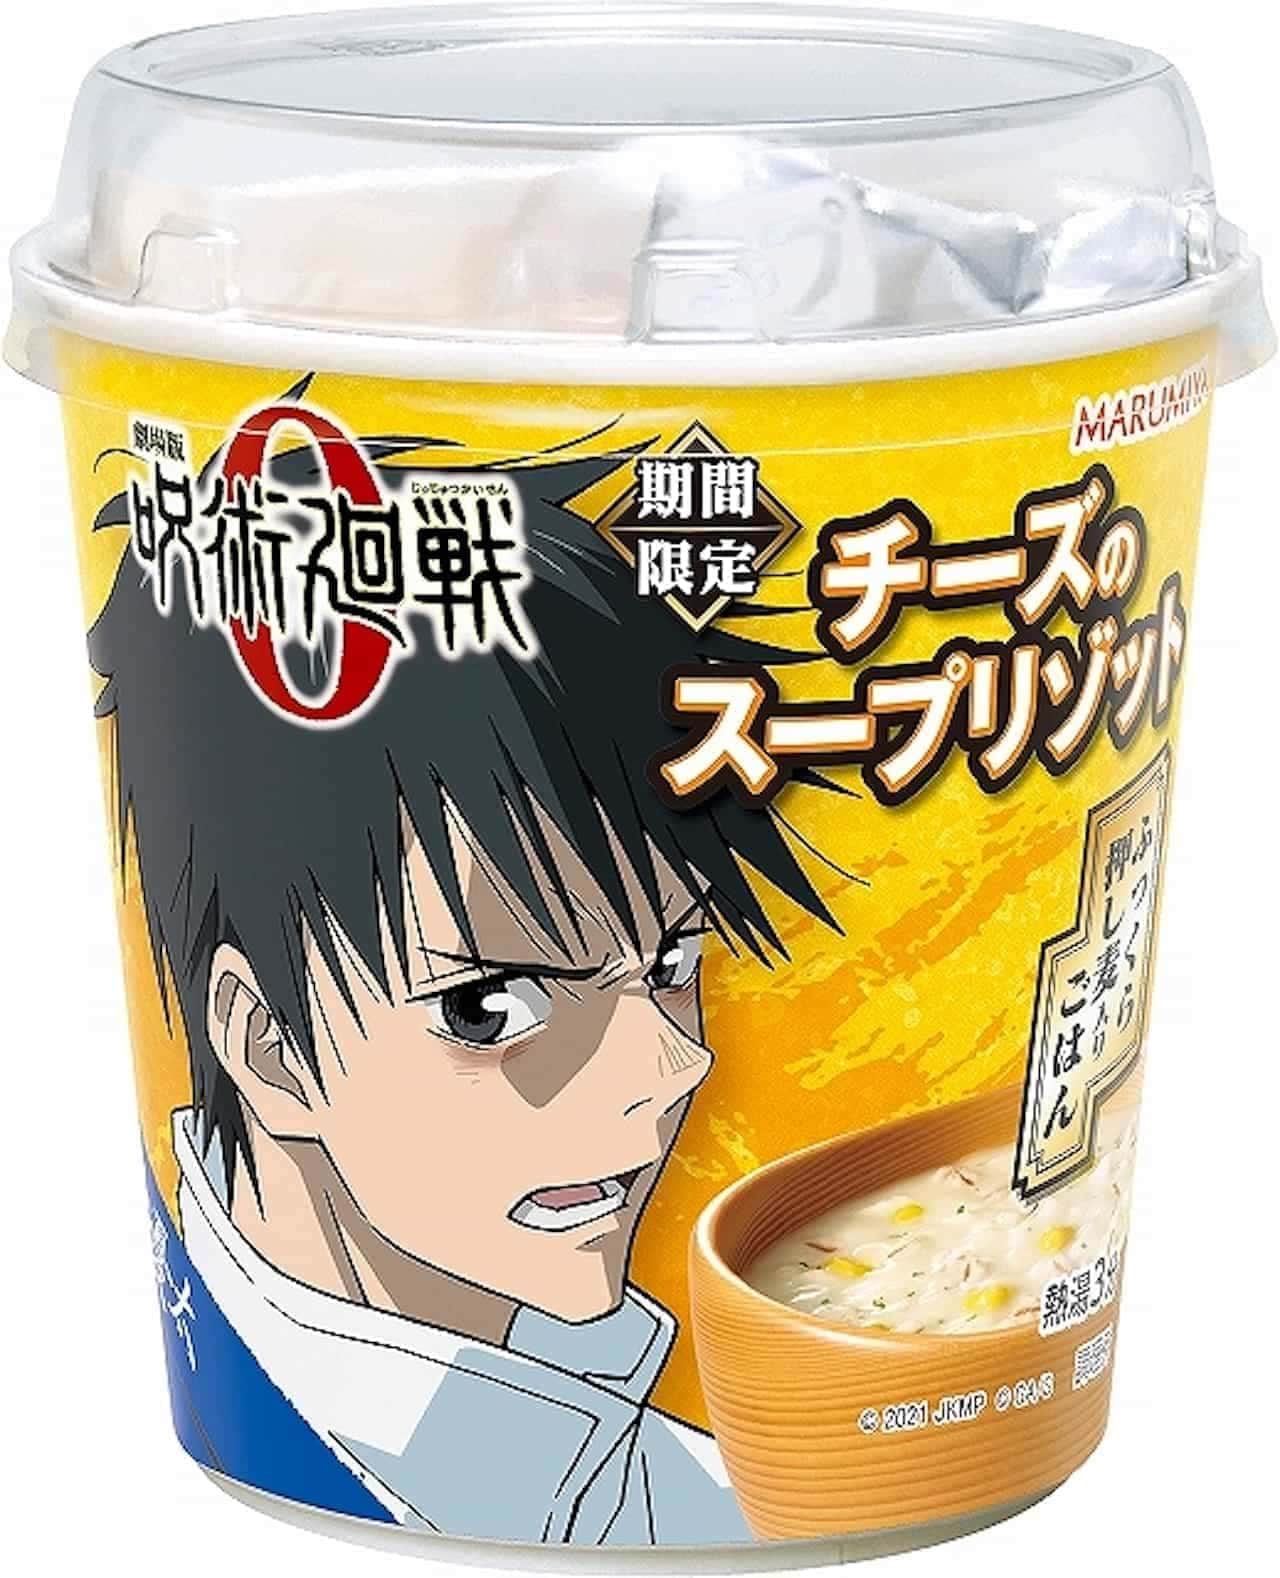 "Jujutsu Kaisen Cheese Soup Risotto for a Limited Time" from Marumiya